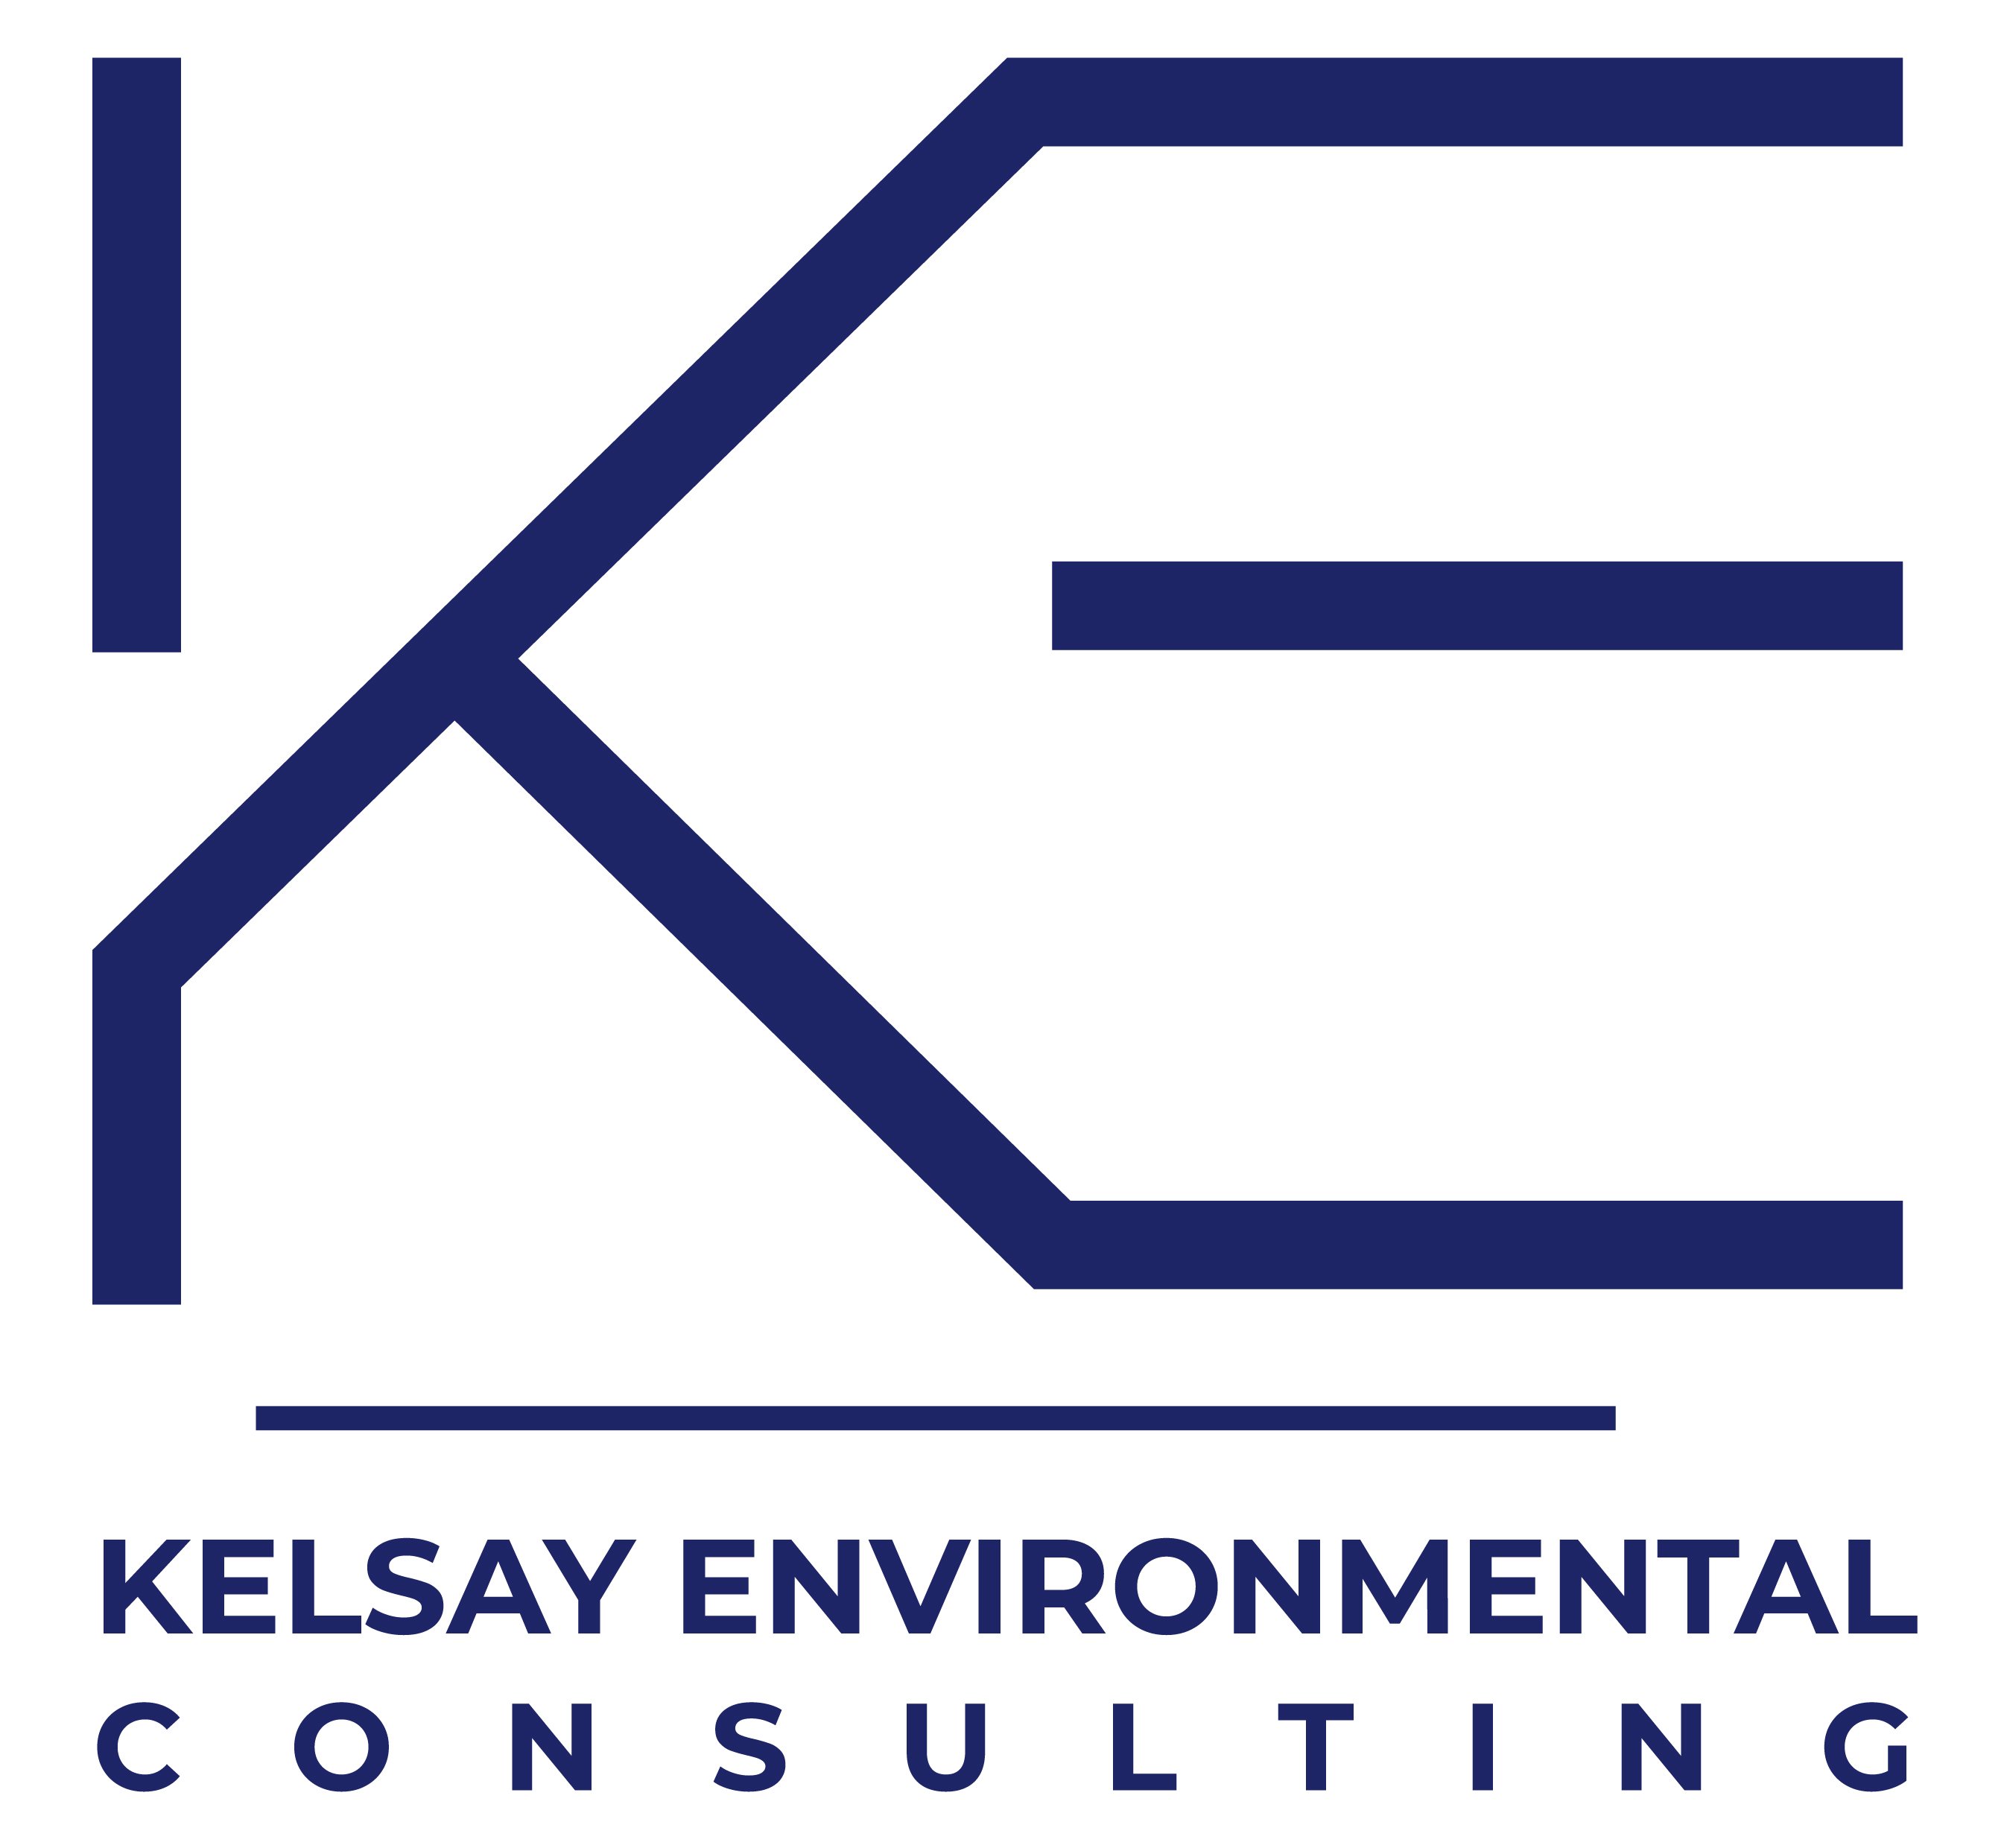 Kelsay Environmental Building Consulting Services Corporation Logo